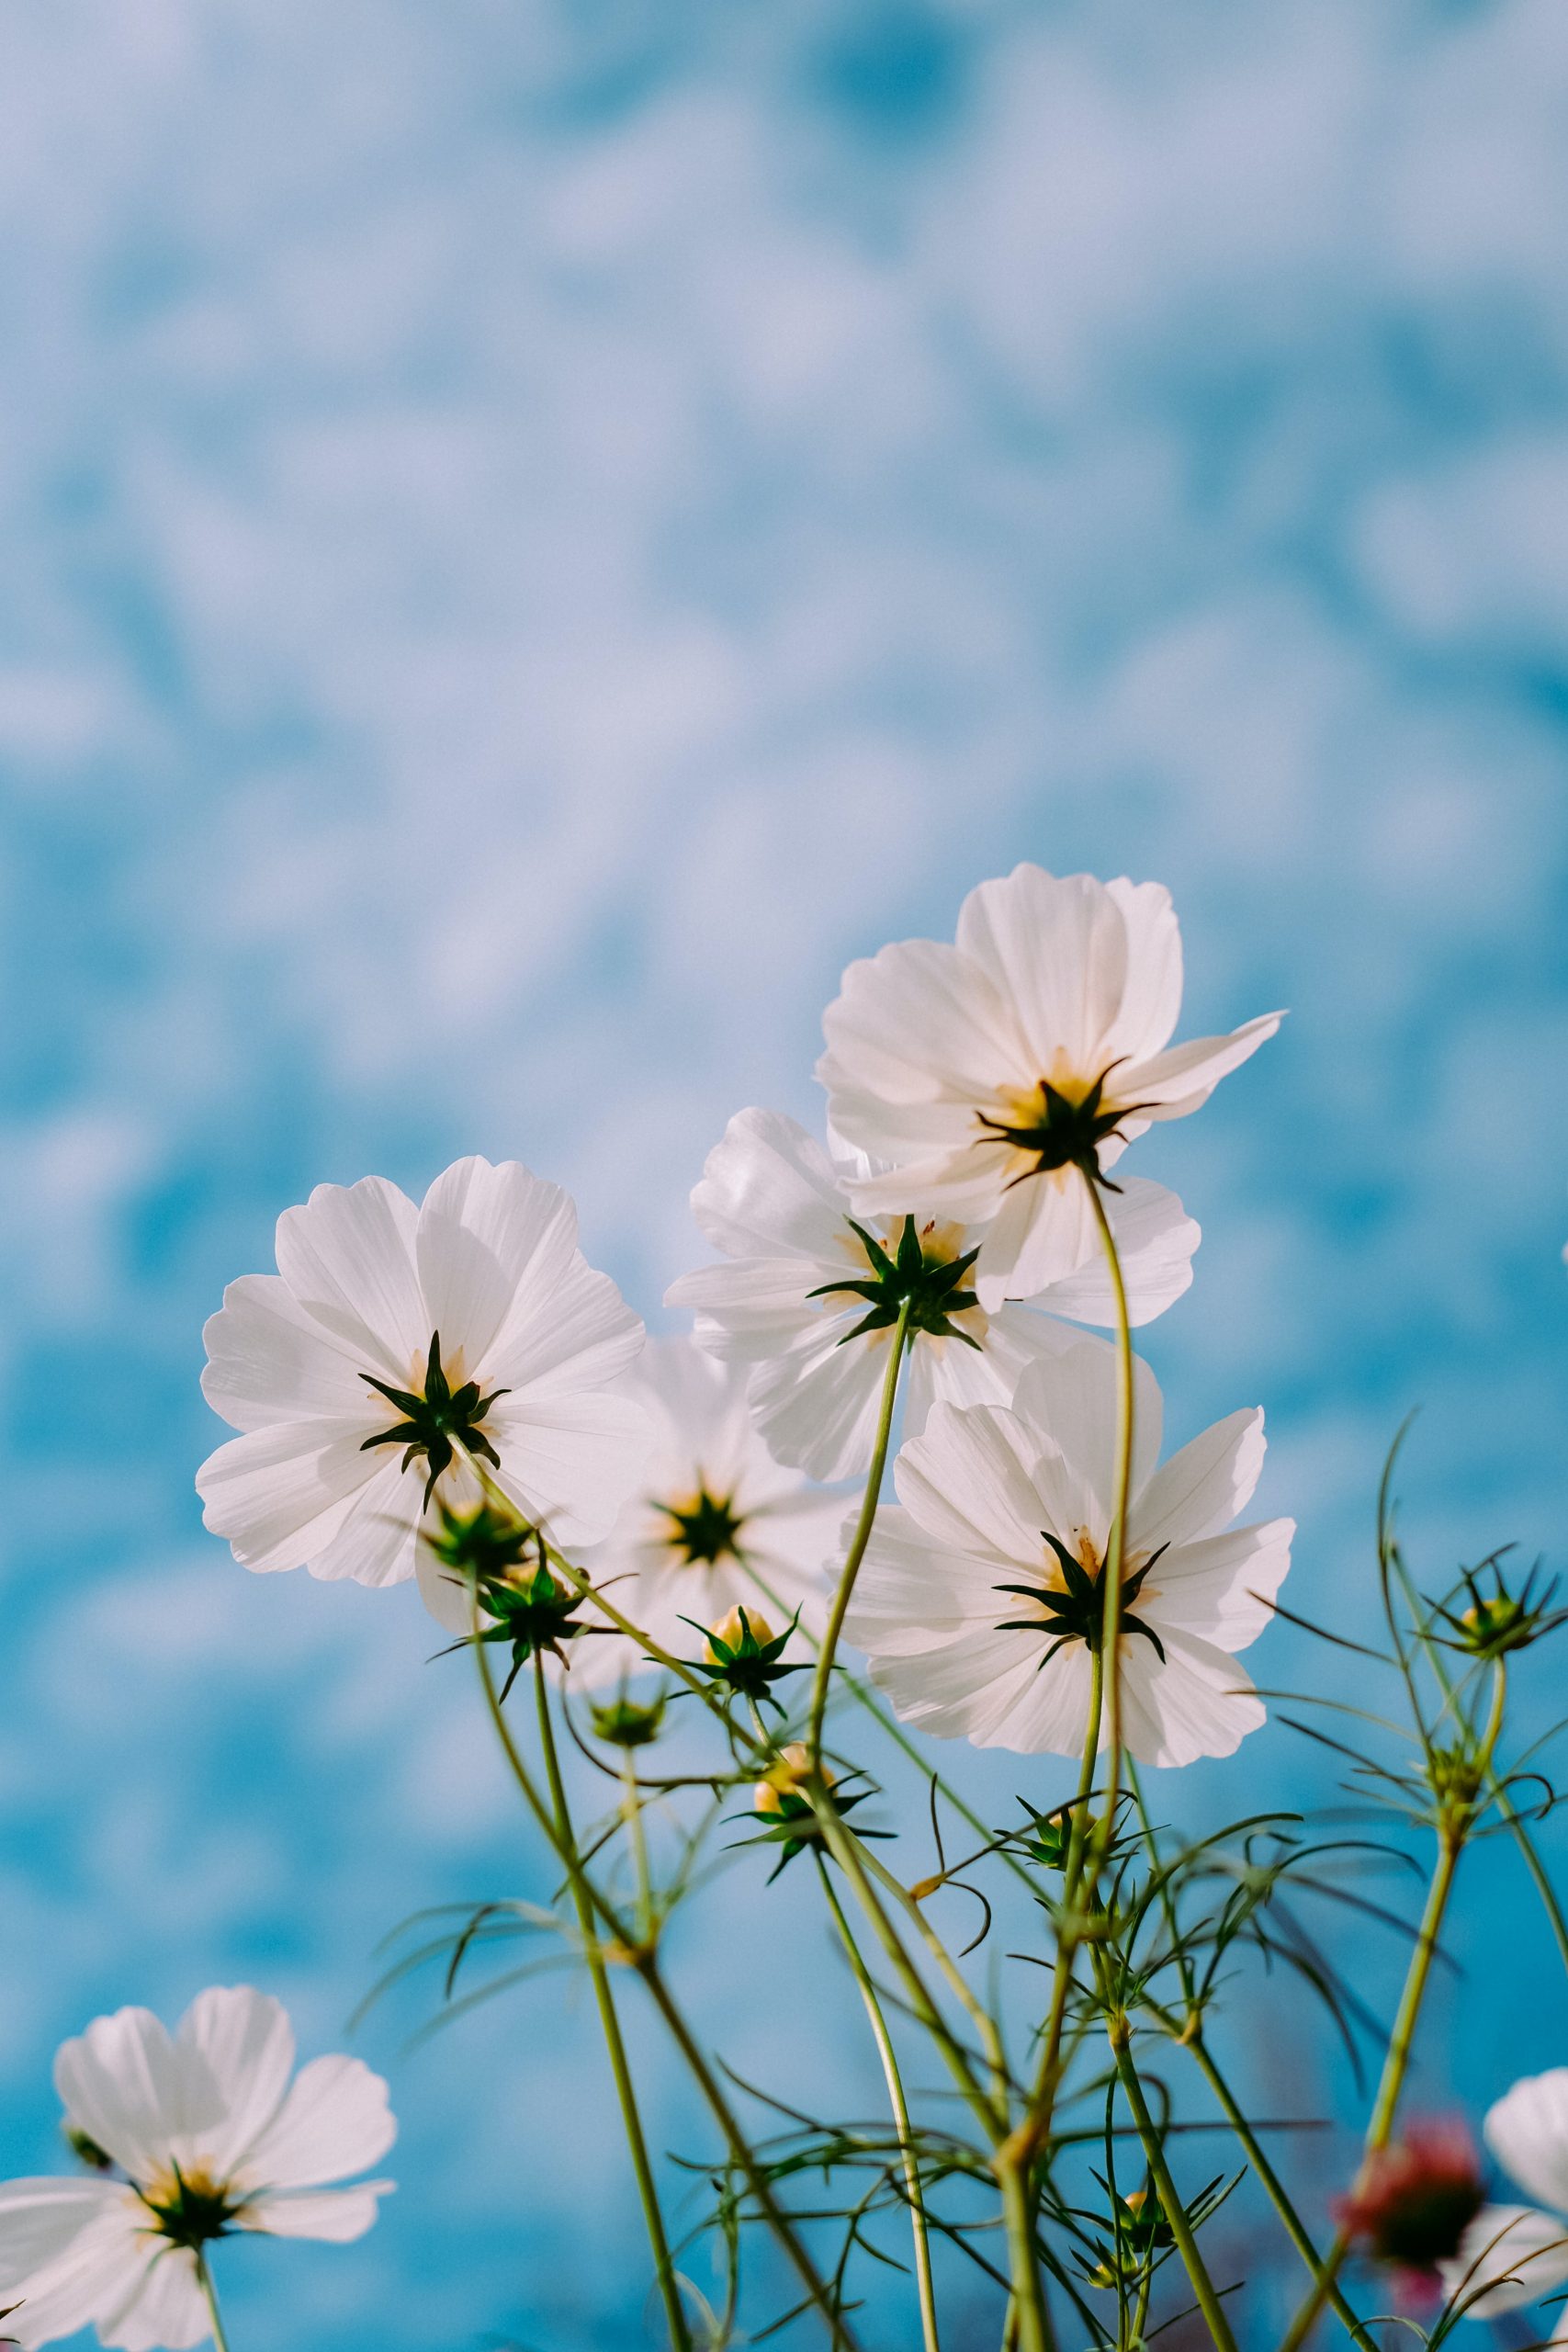 Is It Too Late To Sow Cosmos Seeds?